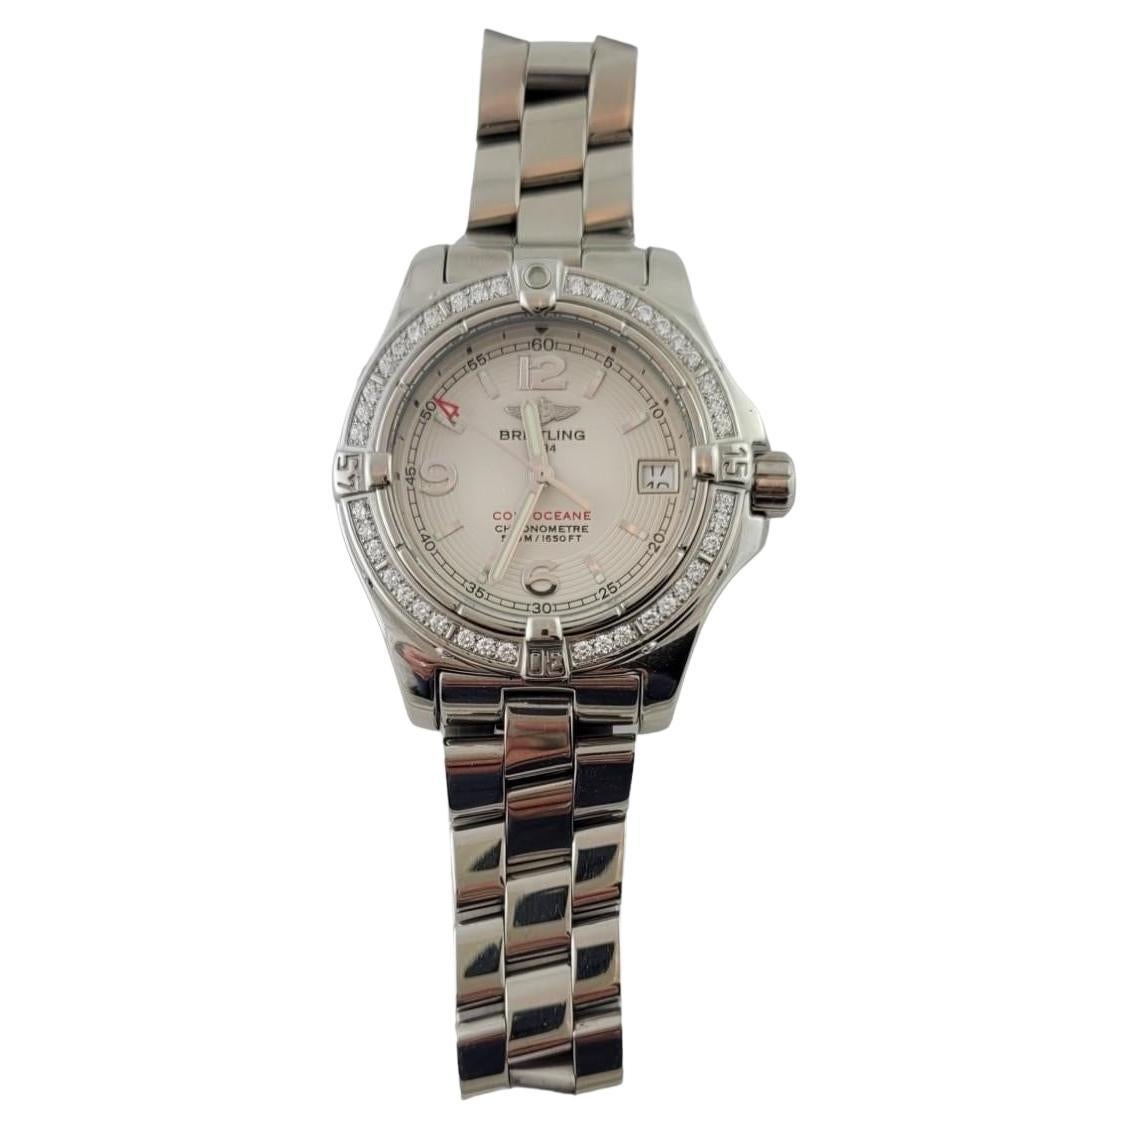 2007 Breitling Ladies Colt Diamond Watch A77380 Box/Papers # 17227